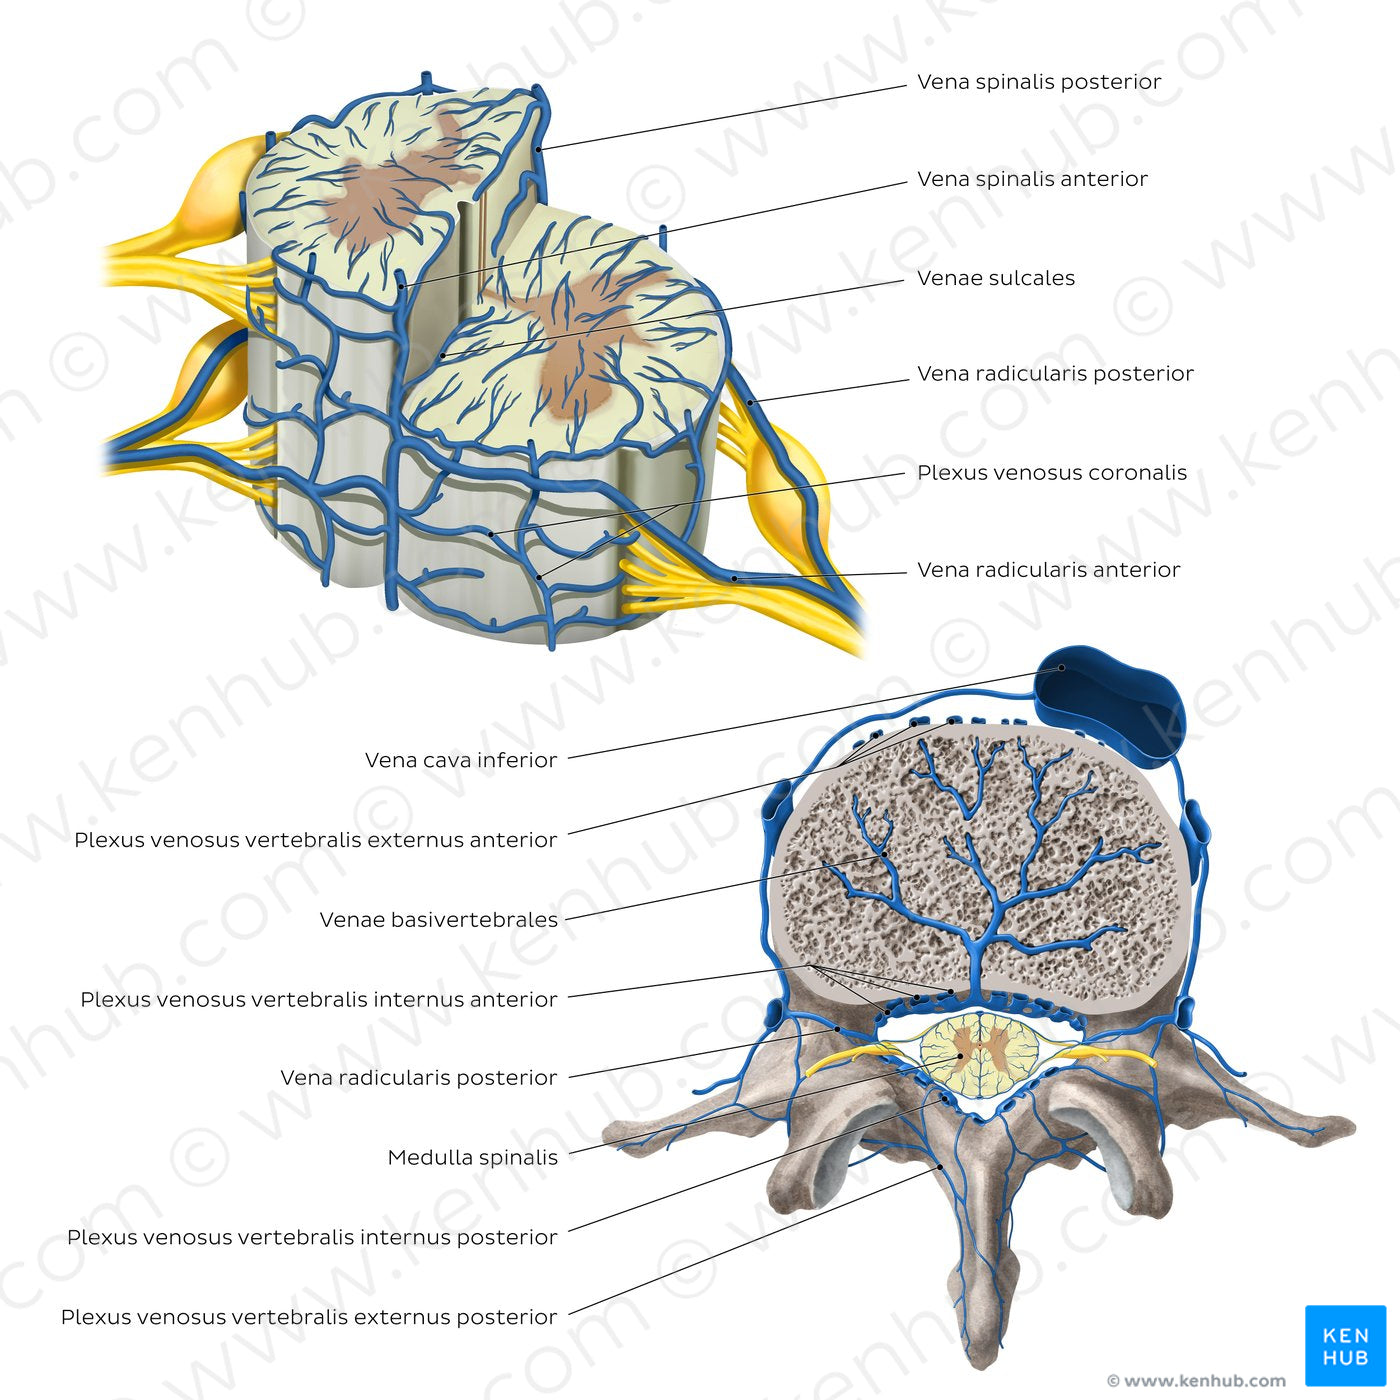 Veins of the spinal cord (Latin)